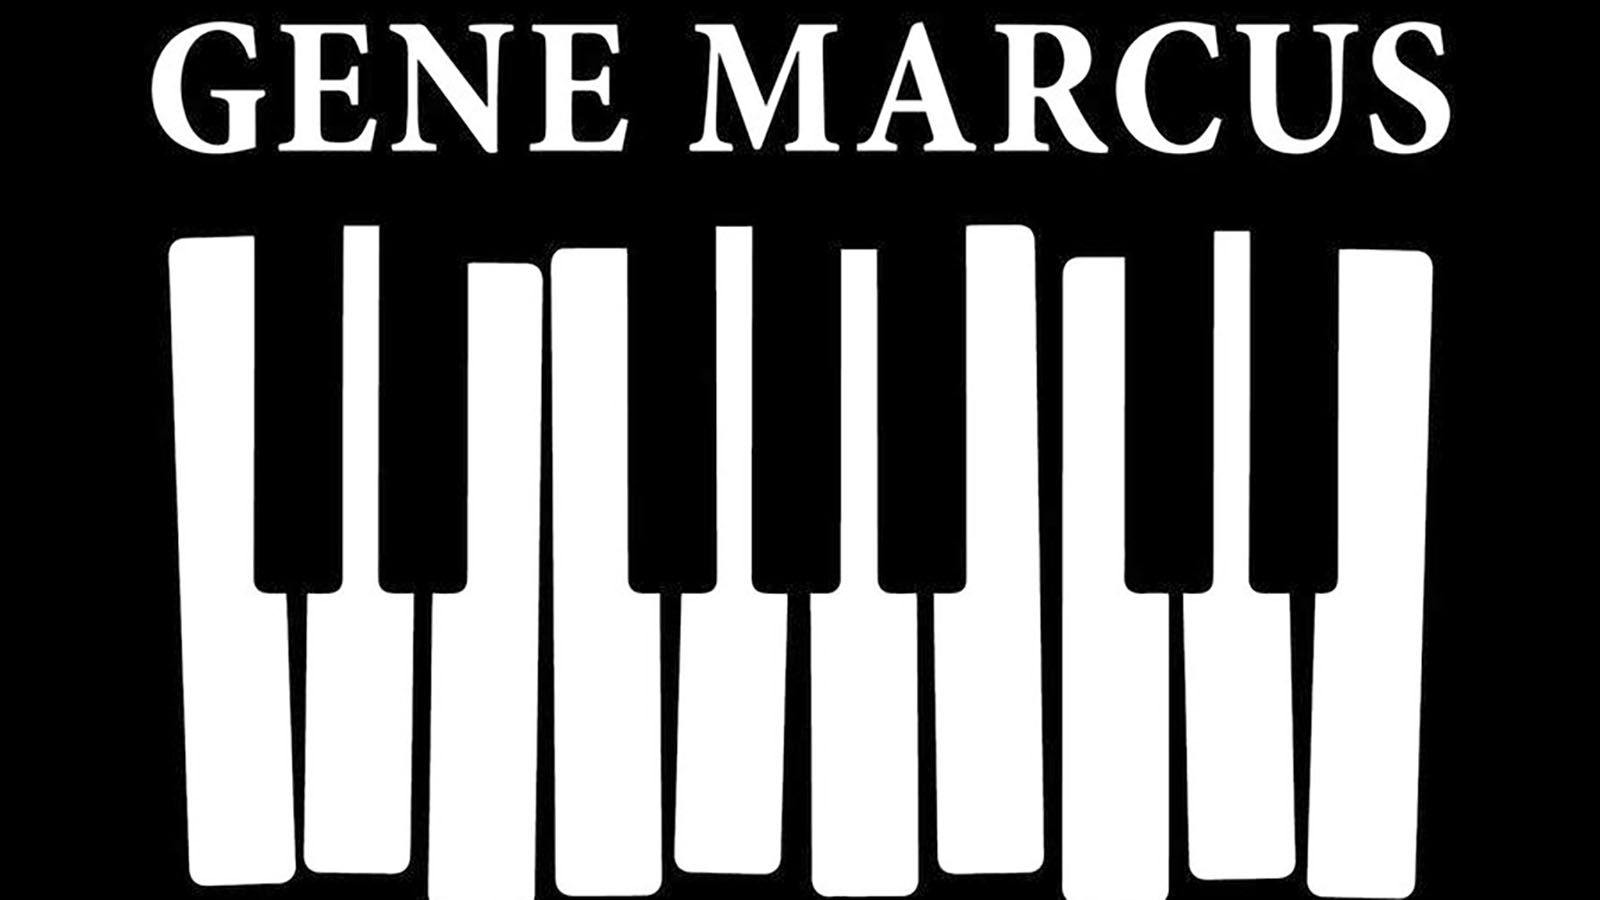 PFW will again host the Gene Marcus Piano Competition.